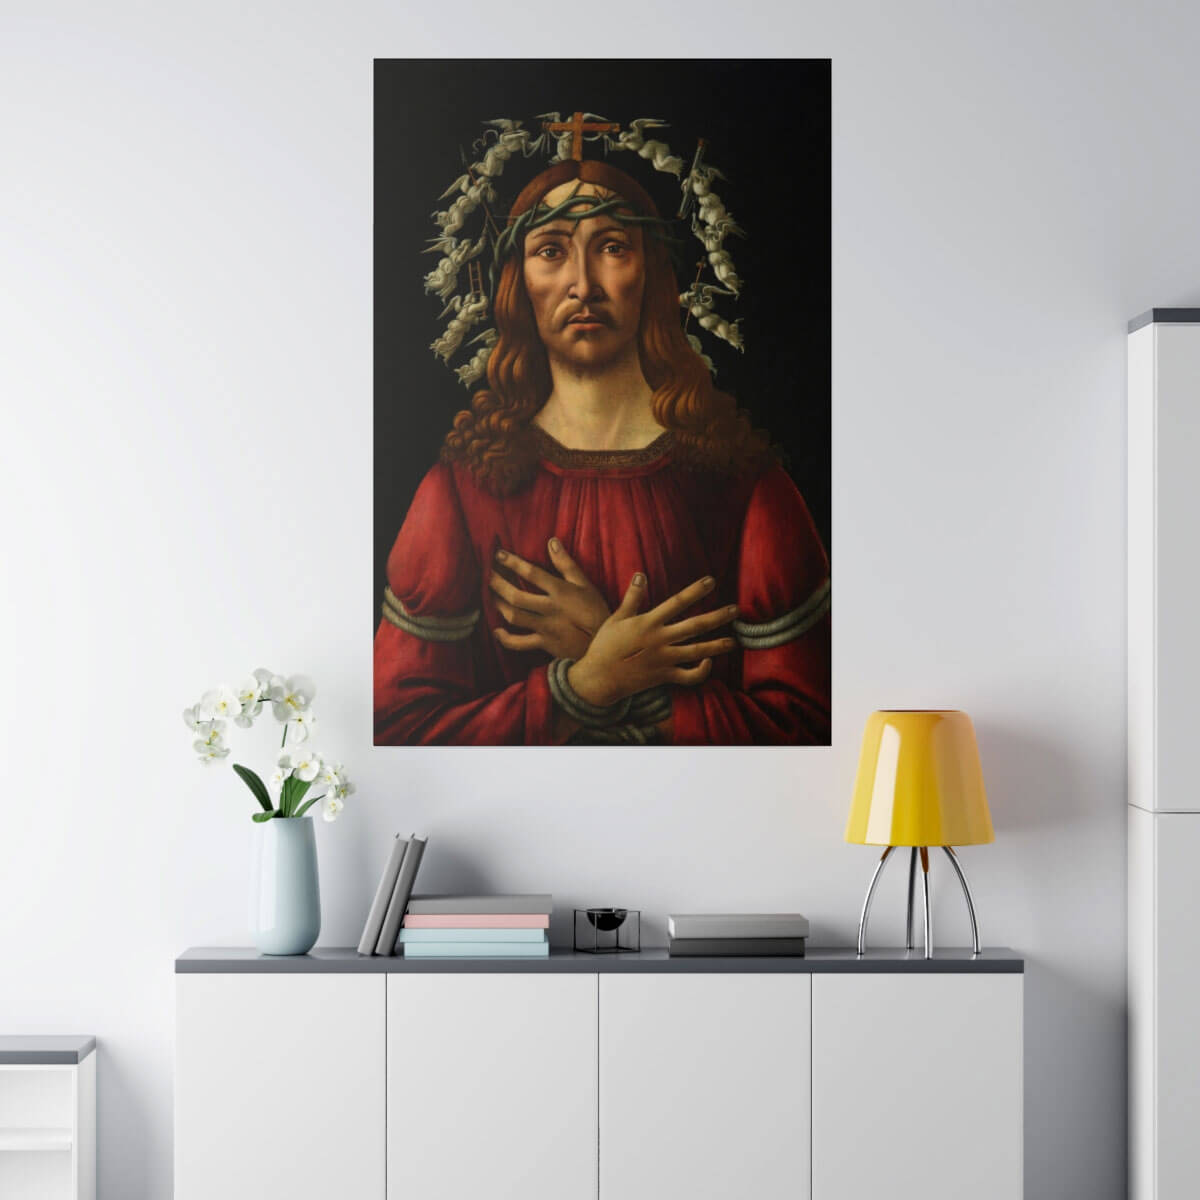 Ethereal beauty captured in a canvas print